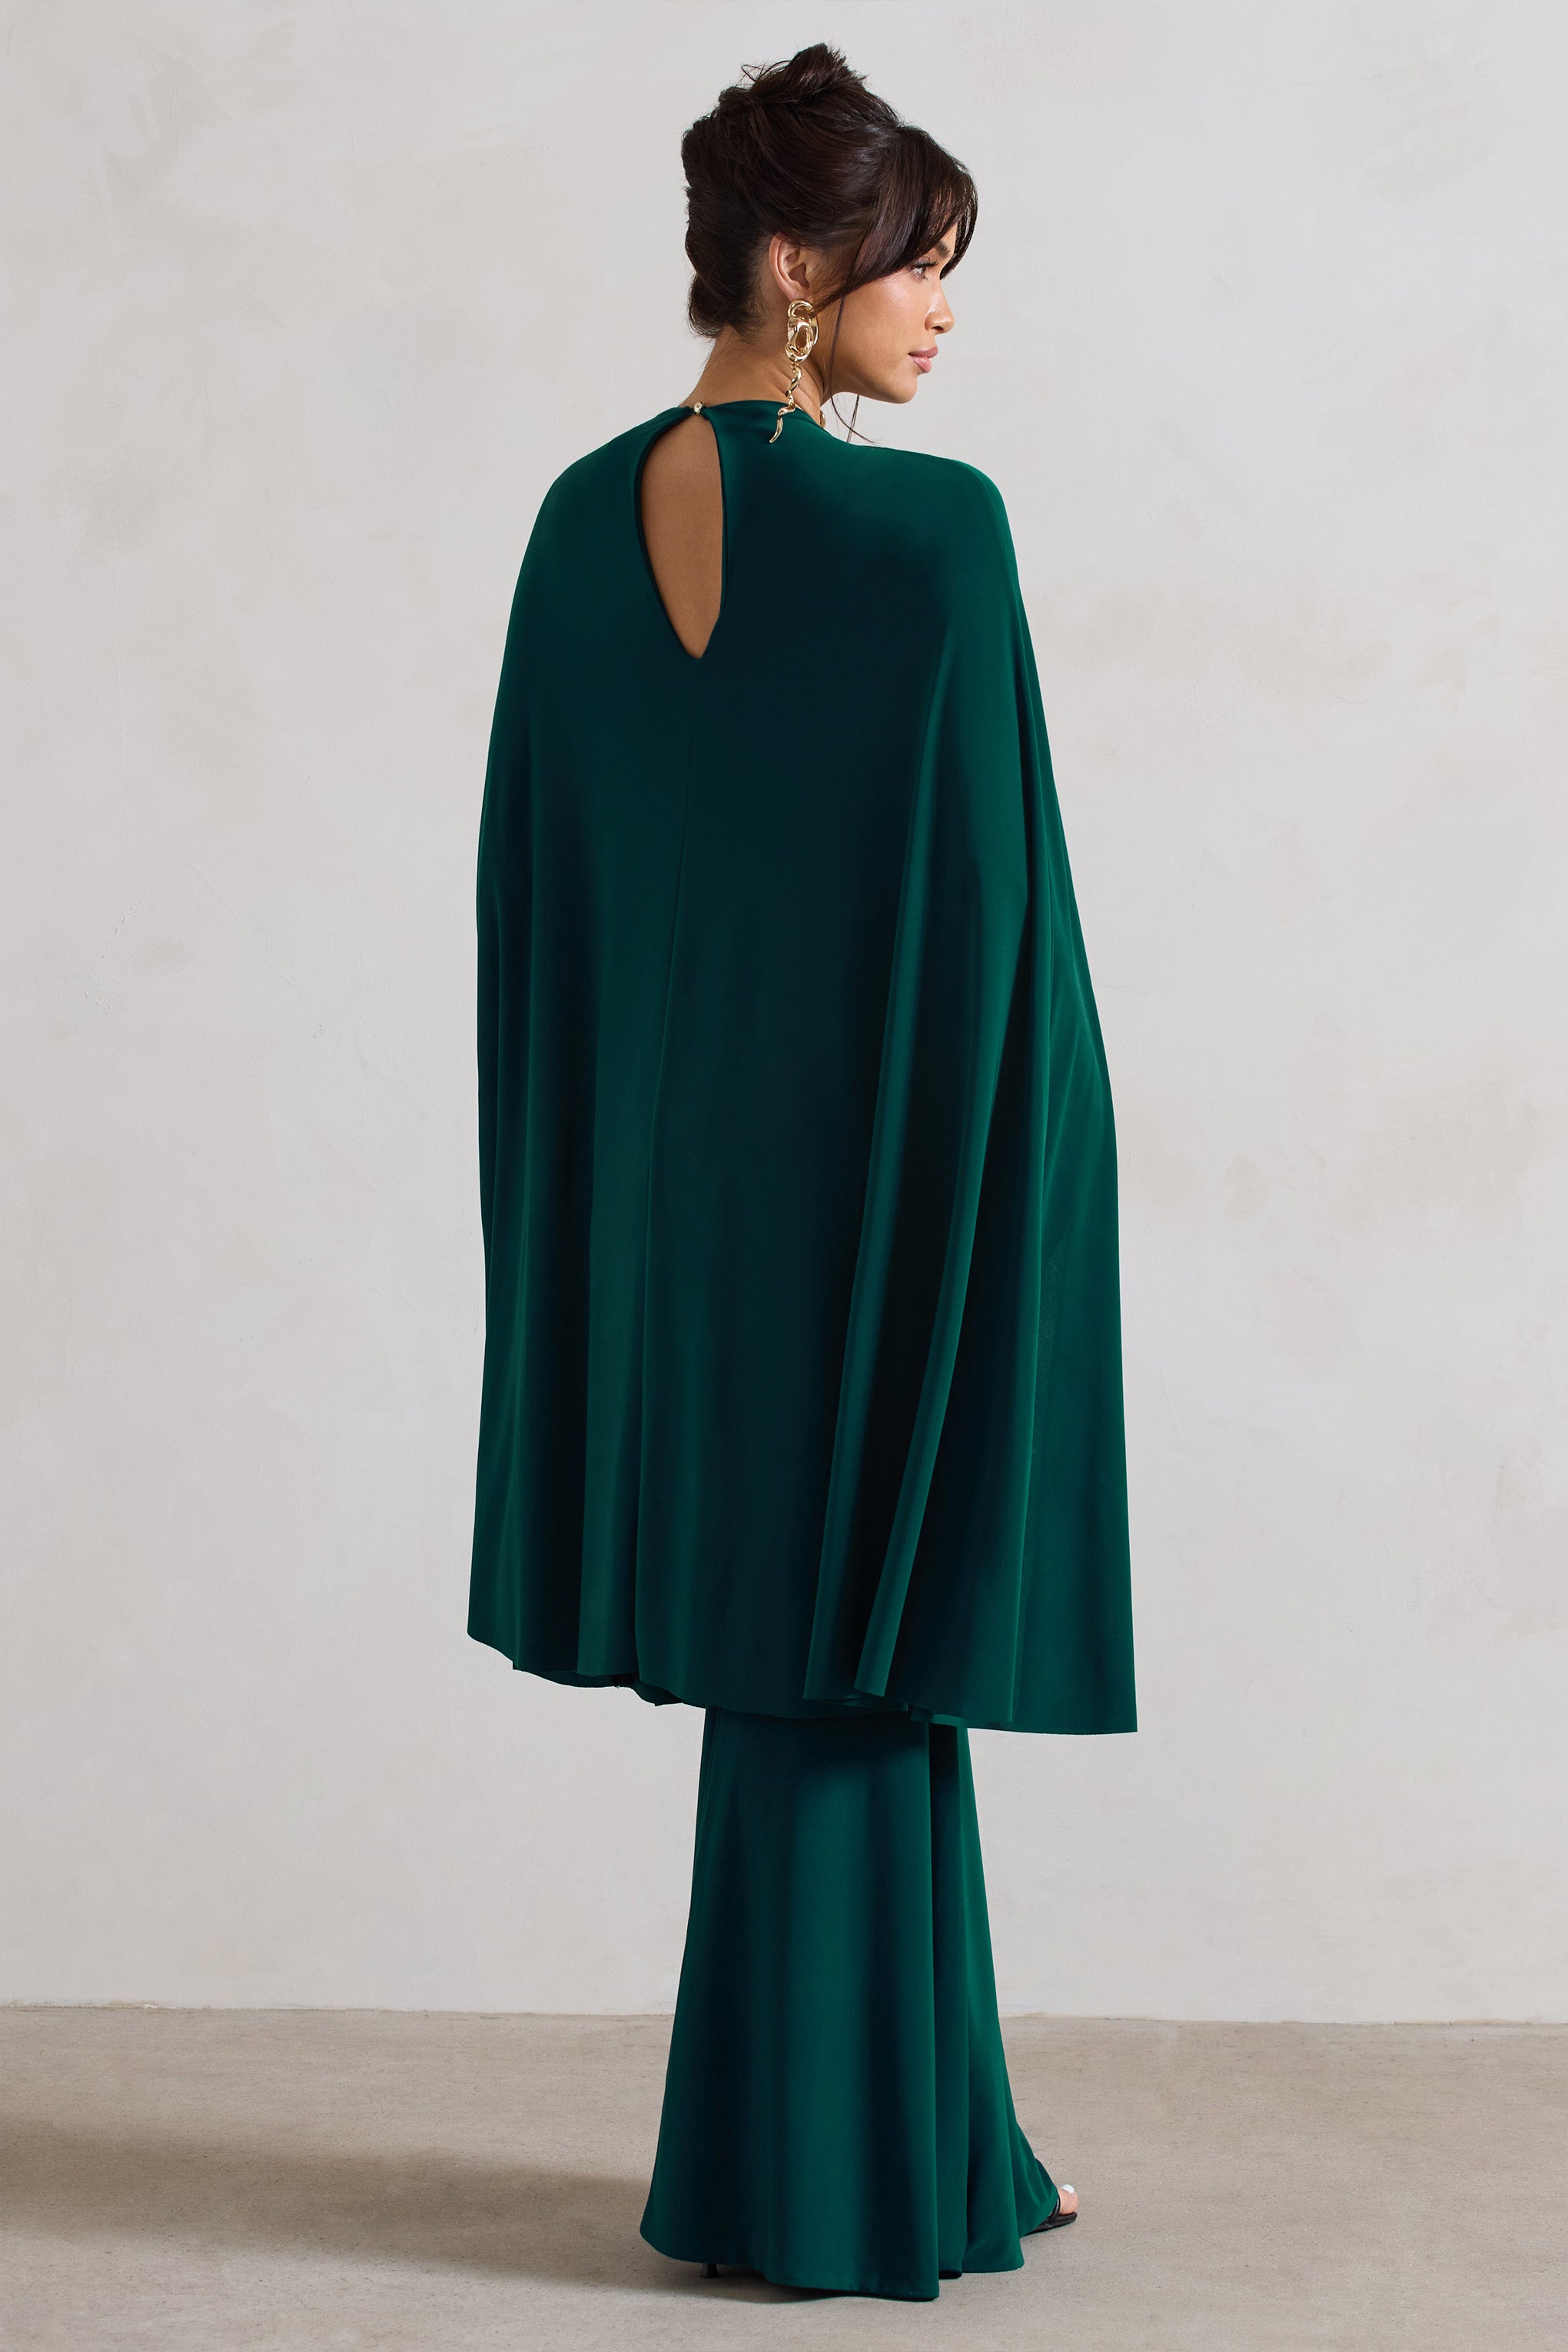 Charmaine Bottle Green High-Neck Maxi Dress With Cape